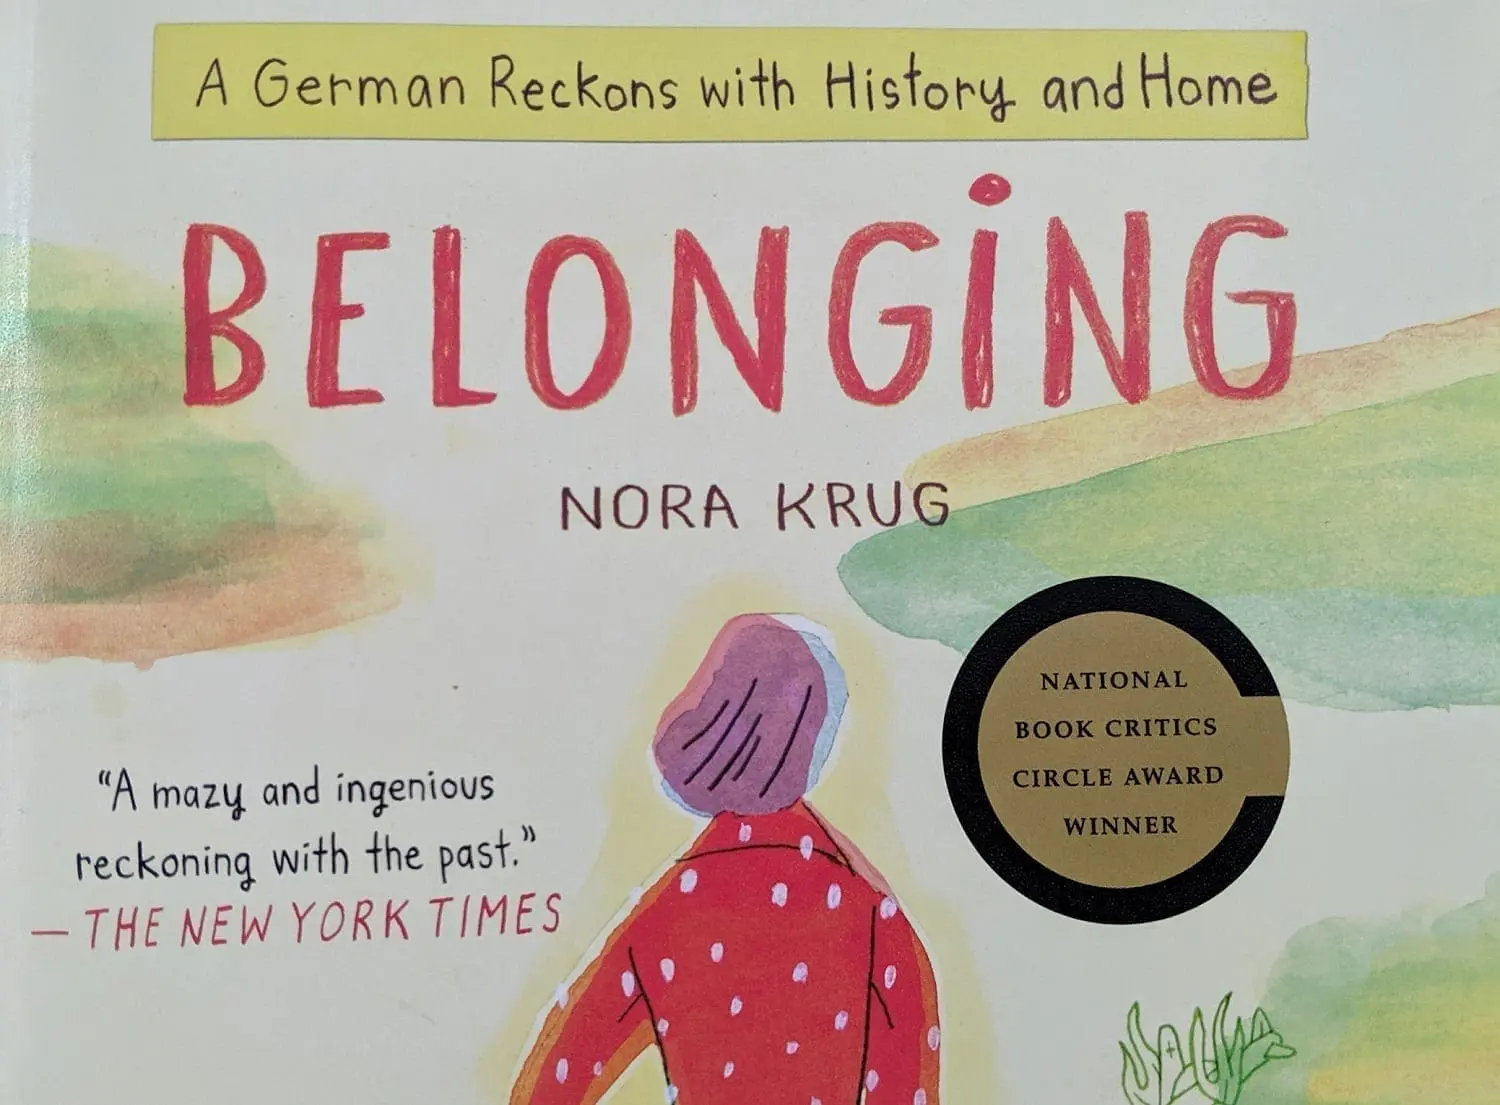 Belonging by Nora Krug – A German Reckons with History and Home